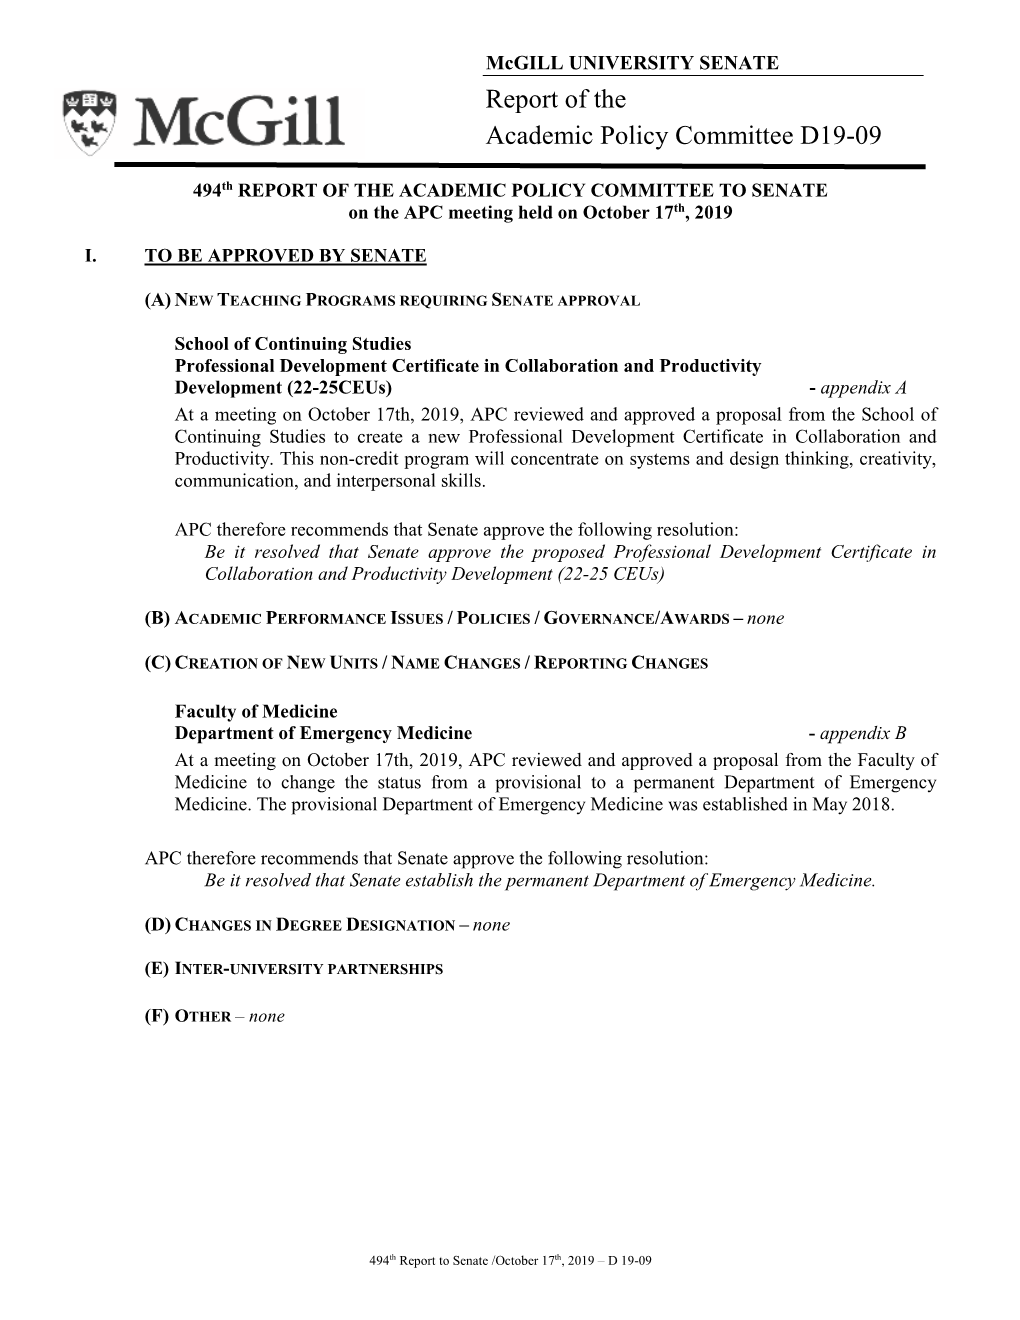 Report of the Academic Policy Committee D19-09